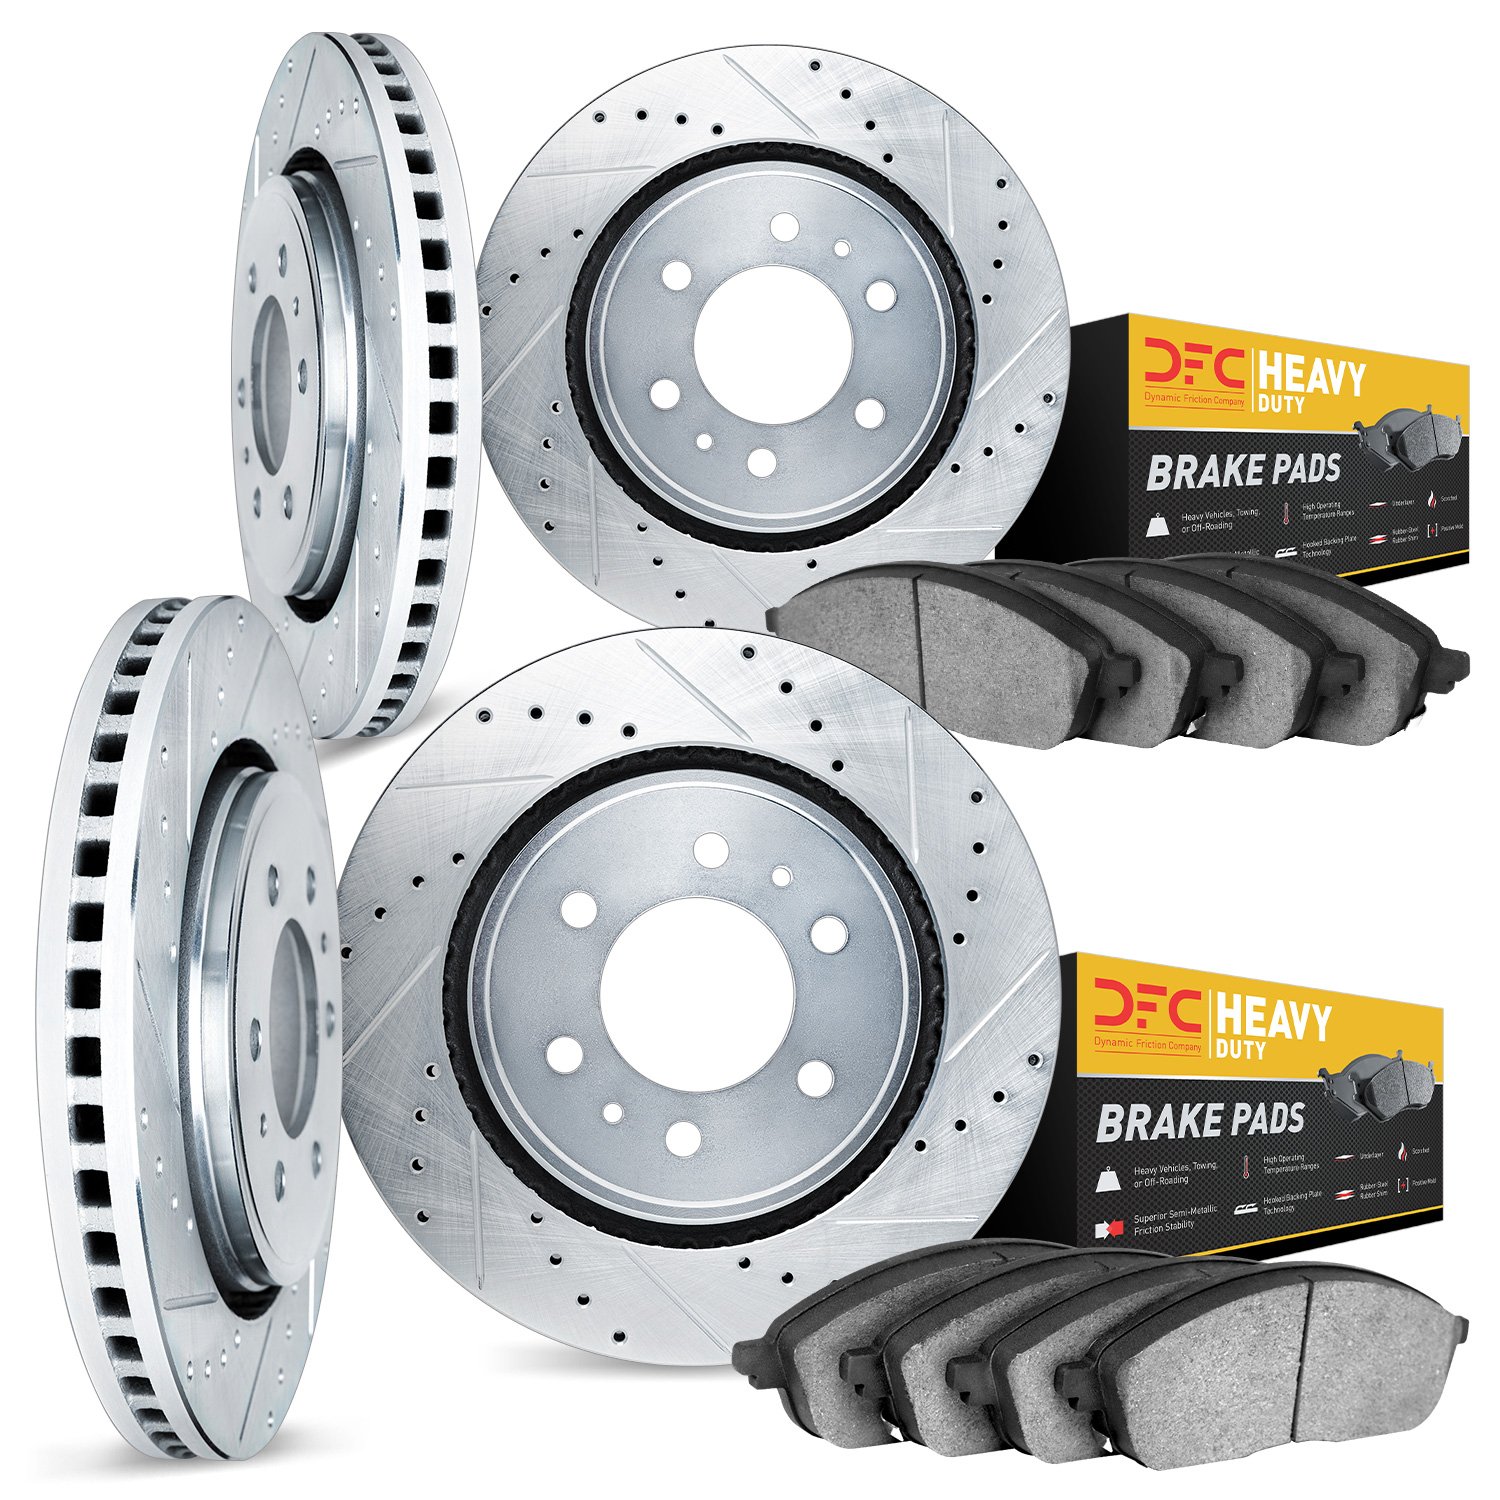 7204-48068 Drilled/Slotted Rotors w/Heavy-Duty Brake Pads Kit [Silver], 2002-2008 GM, Position: Front and Rear